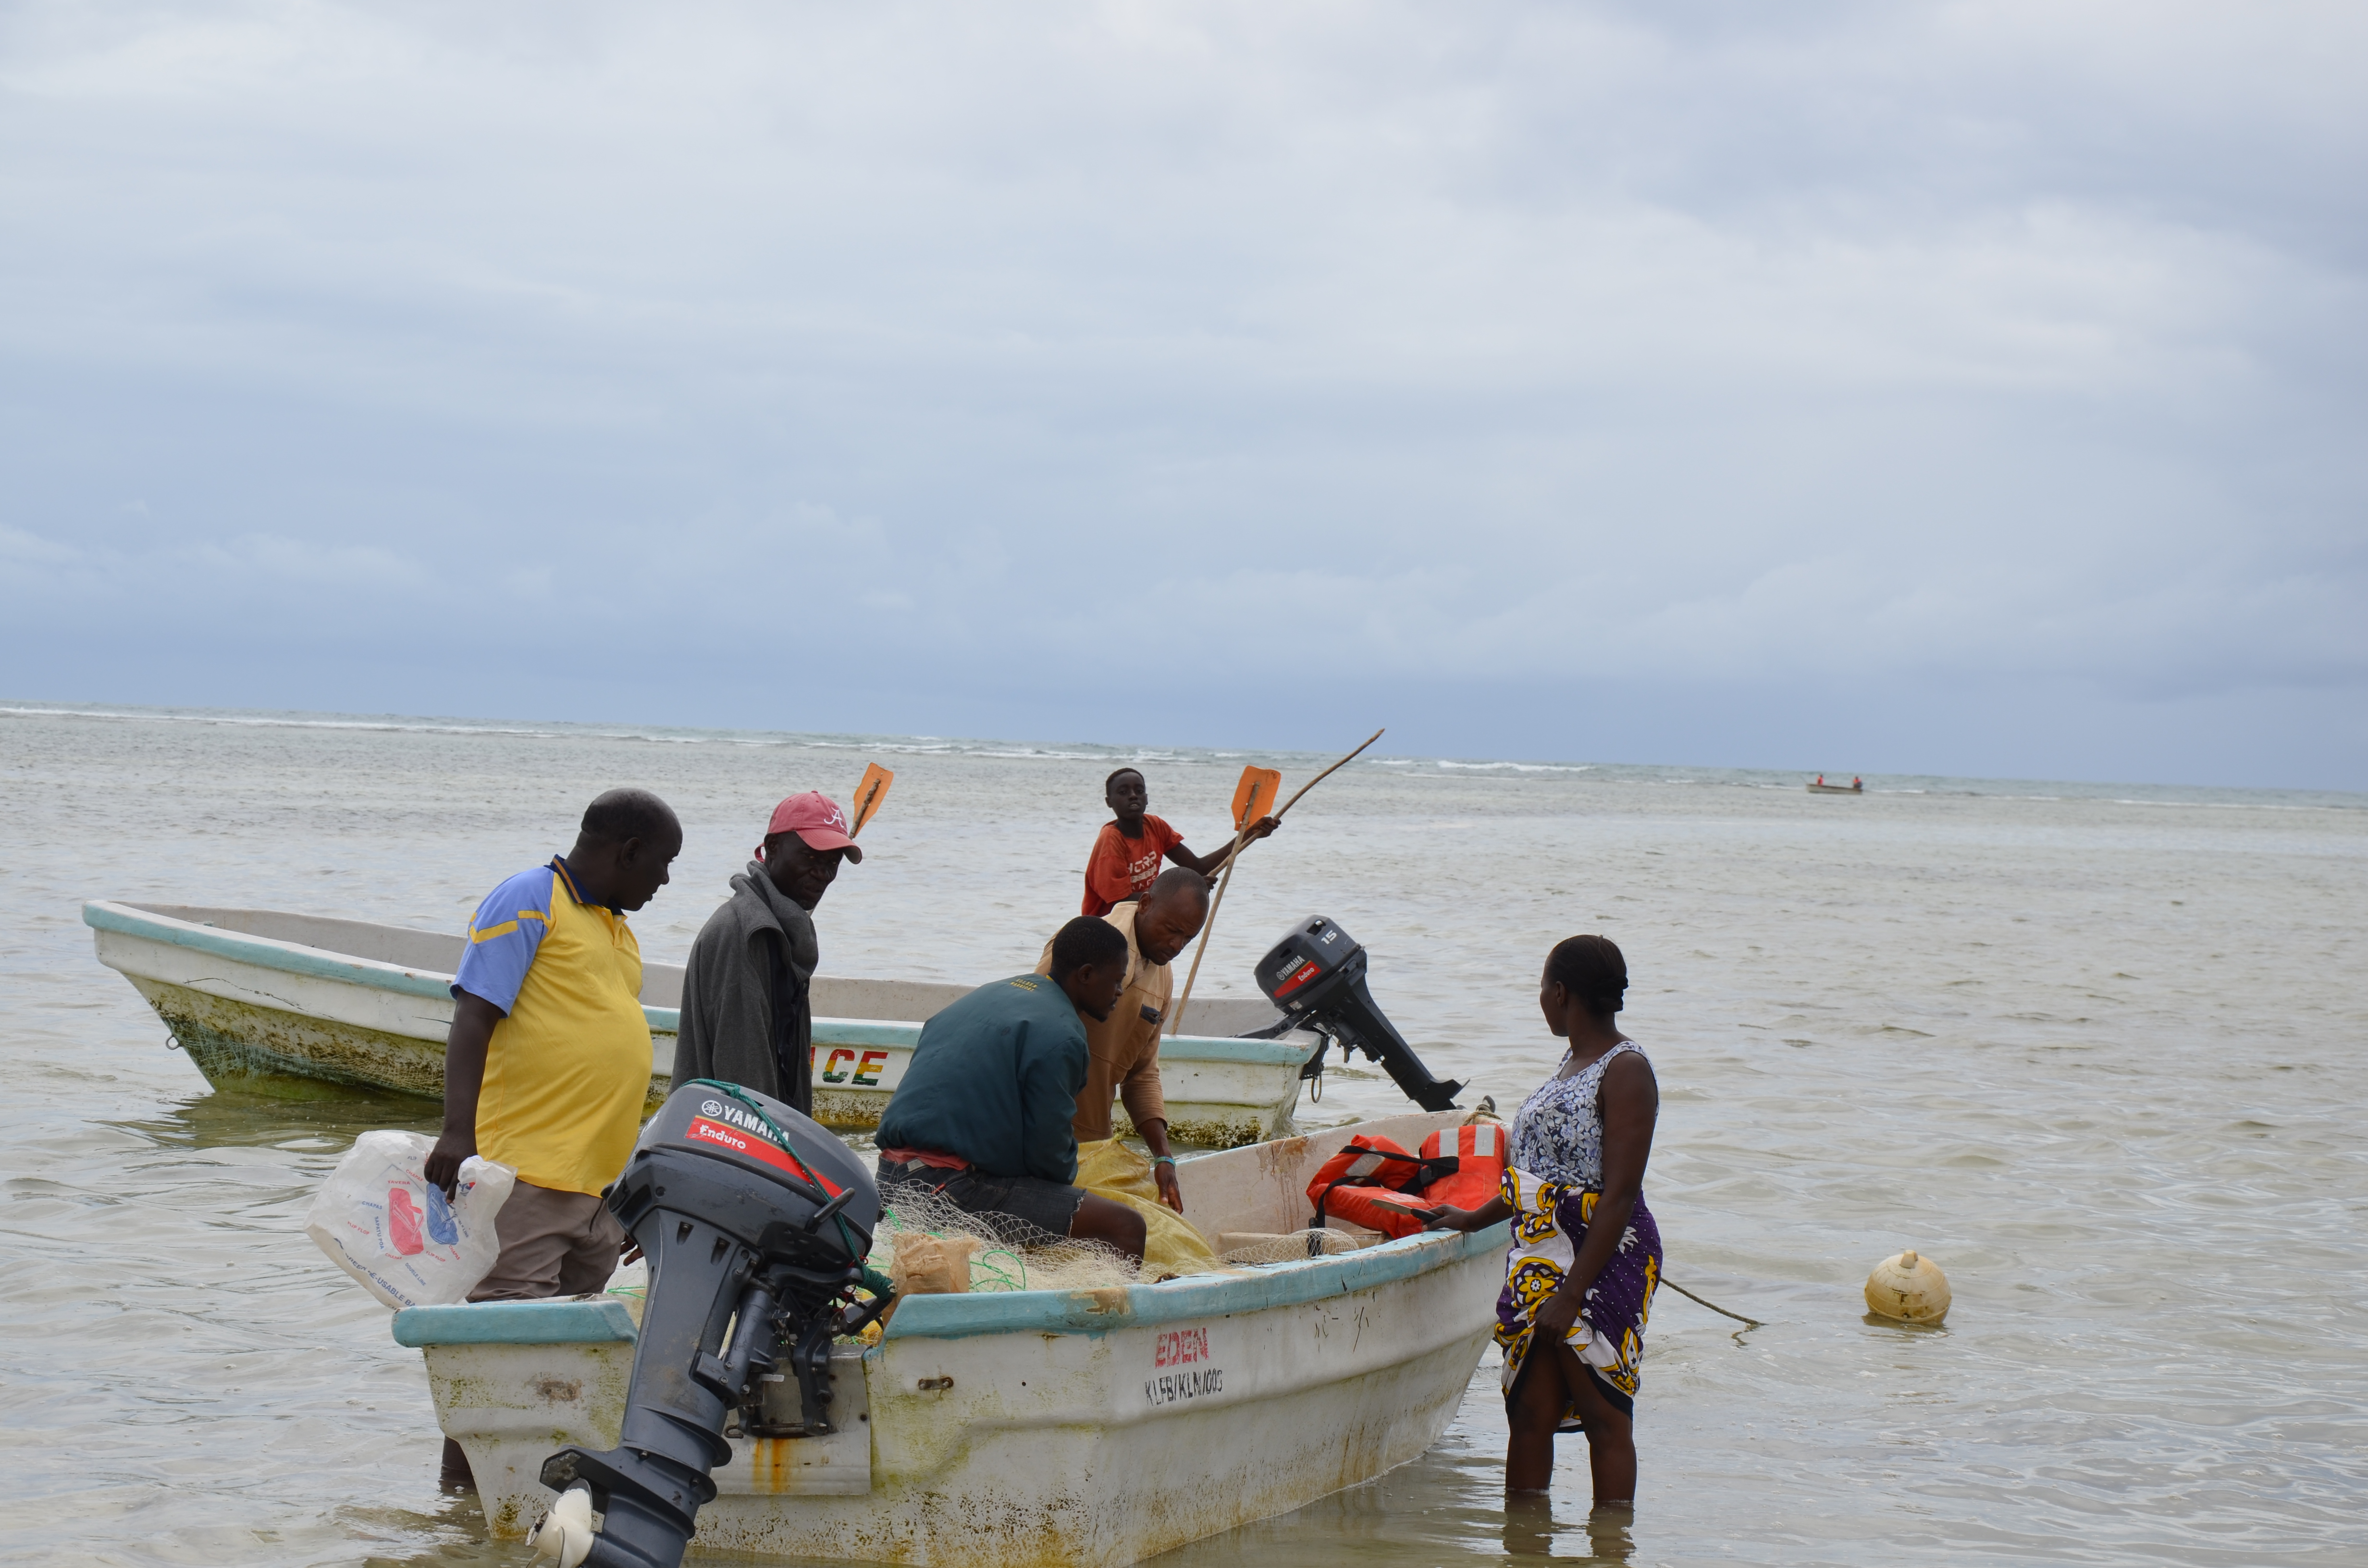  Salim and his colleagues sell their catch directly at the beach to a group of women, under the supervision of the boat owner.Today, the net is full of barracuda and michorochoro or keeltail needlefish. September to December is usually a good fishing season for Kanamai fishers. 